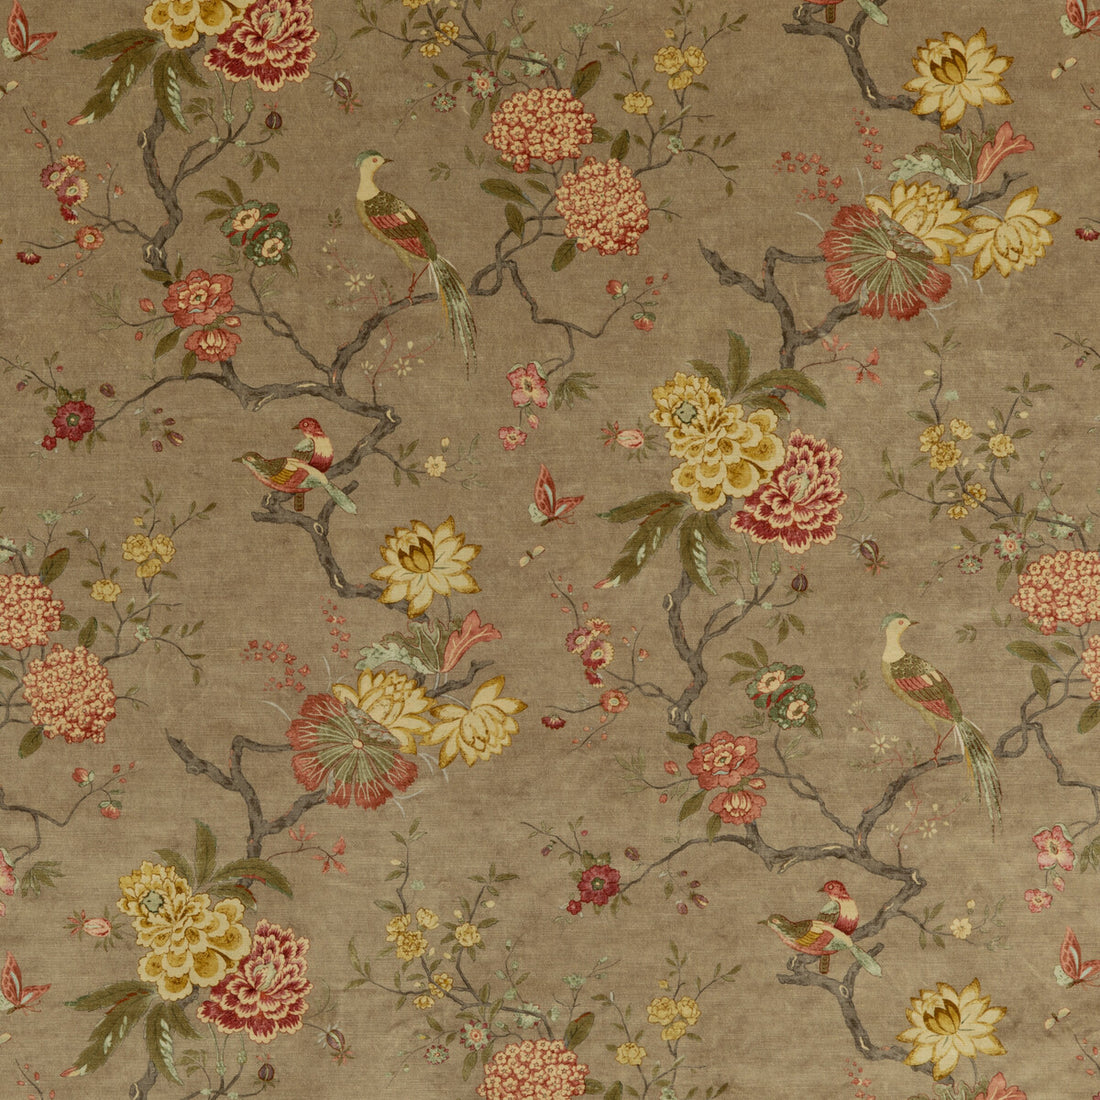 Oriental Bird Velvet fabric in mole color - pattern BP10818.1.0 - by G P &amp; J Baker in the Signature Velvets collection